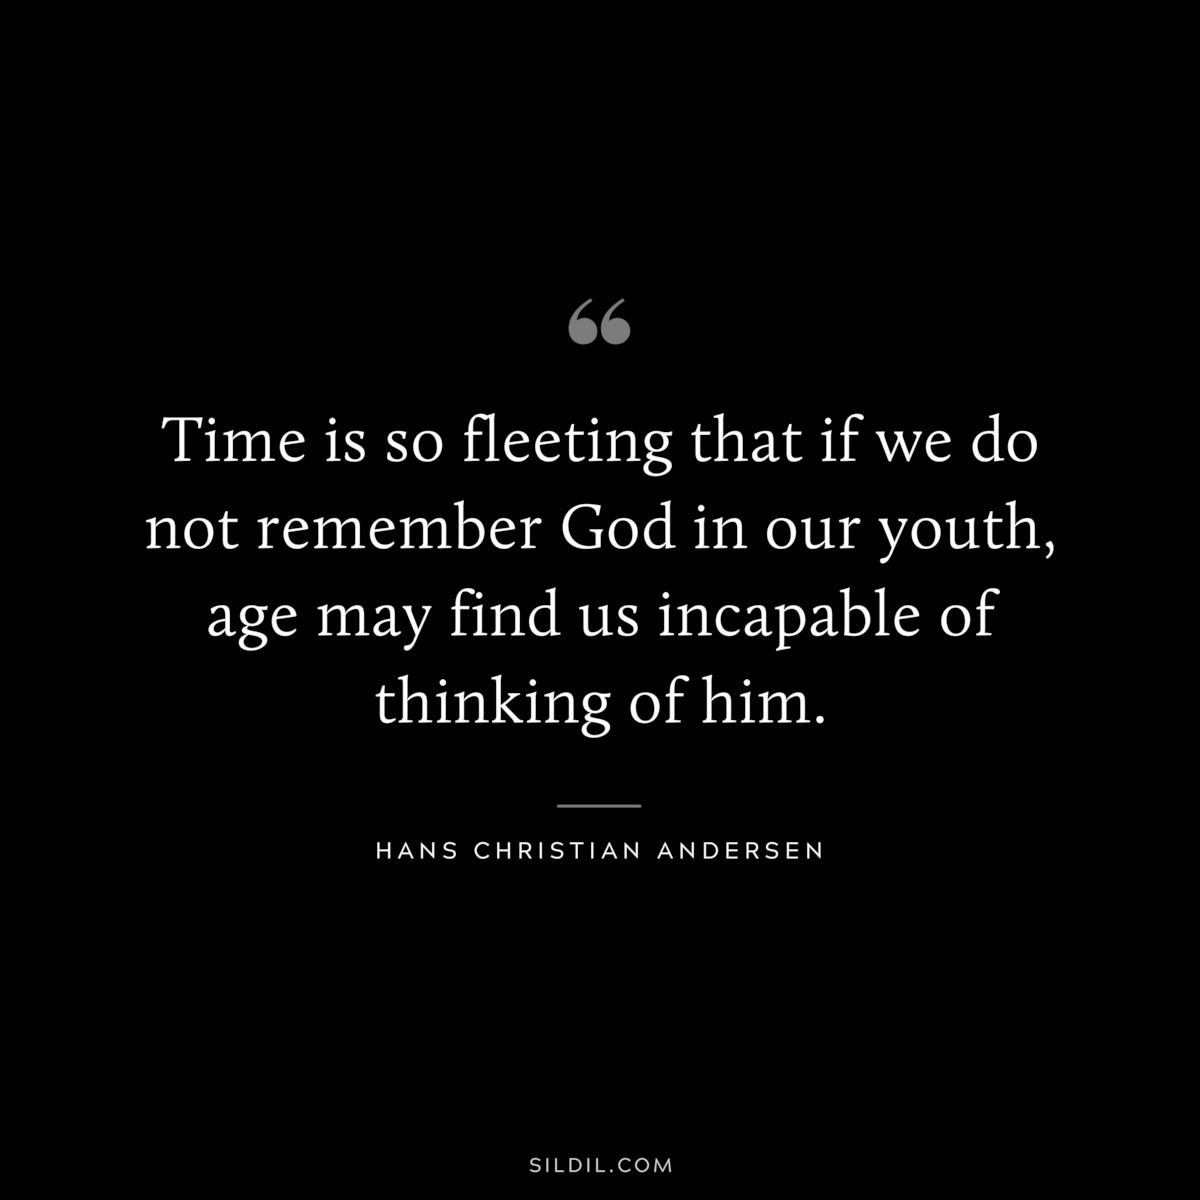 Time is so fleeting that if we do not remember God in our youth, age may find us incapable of thinking of him. ― Hans Christian Andersen